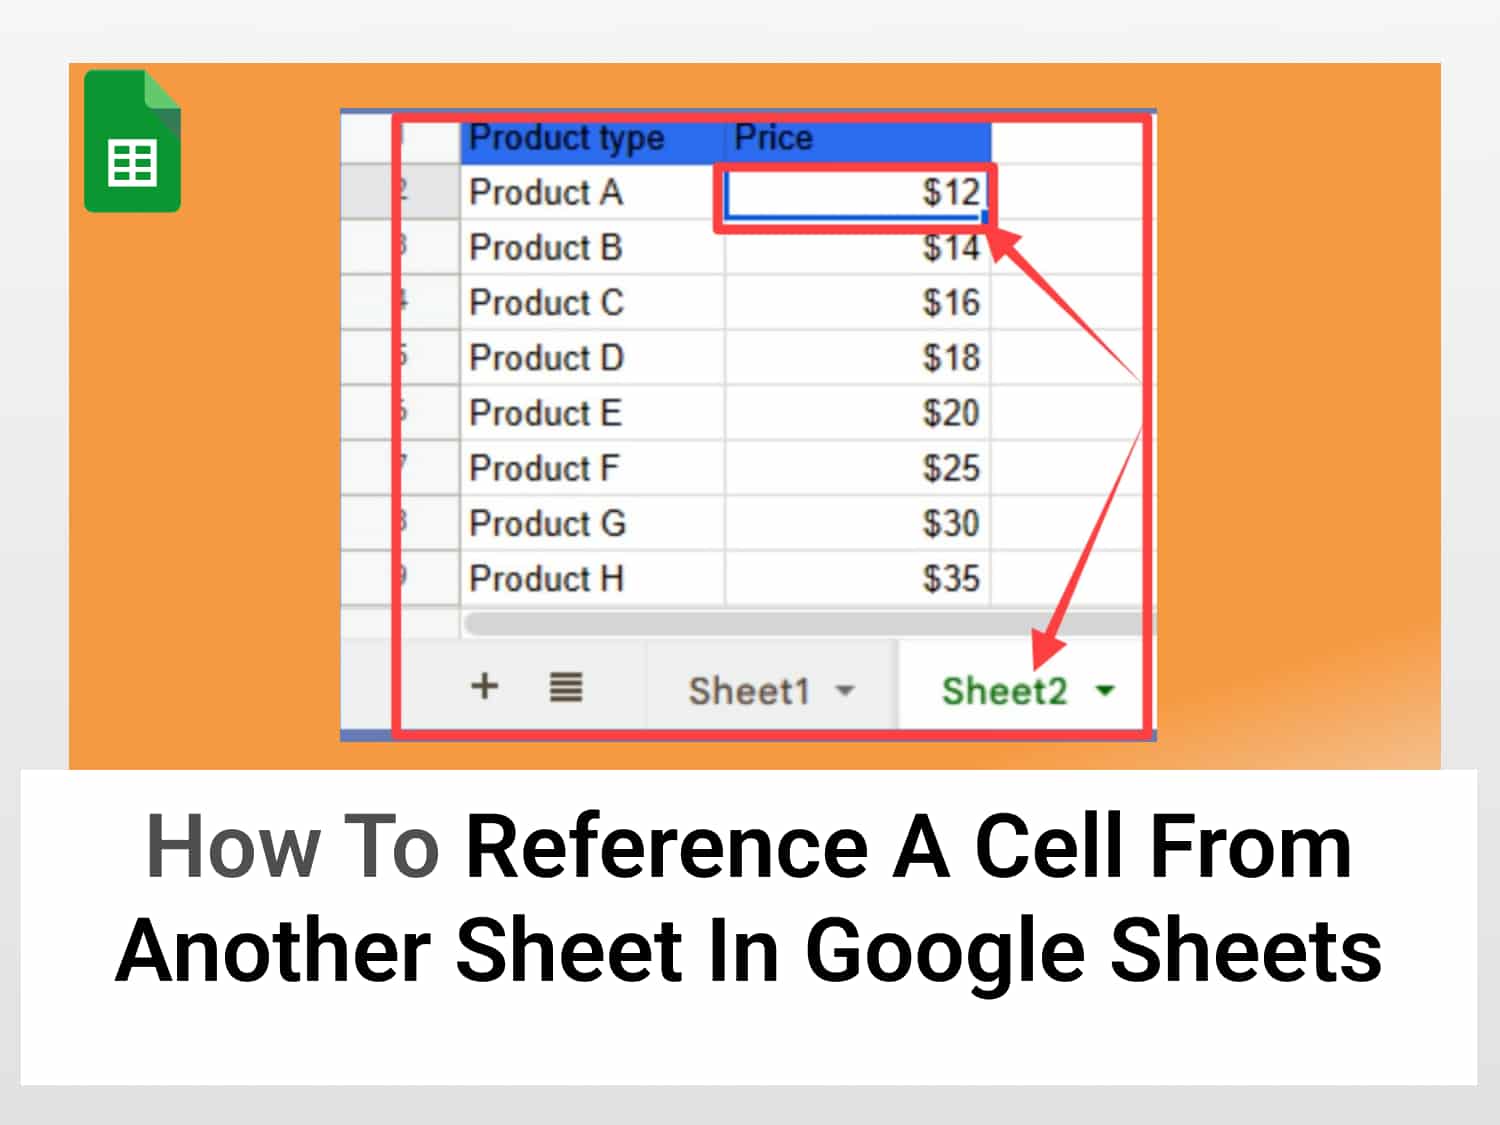 How to reference a cell from another cell in Google Sheets